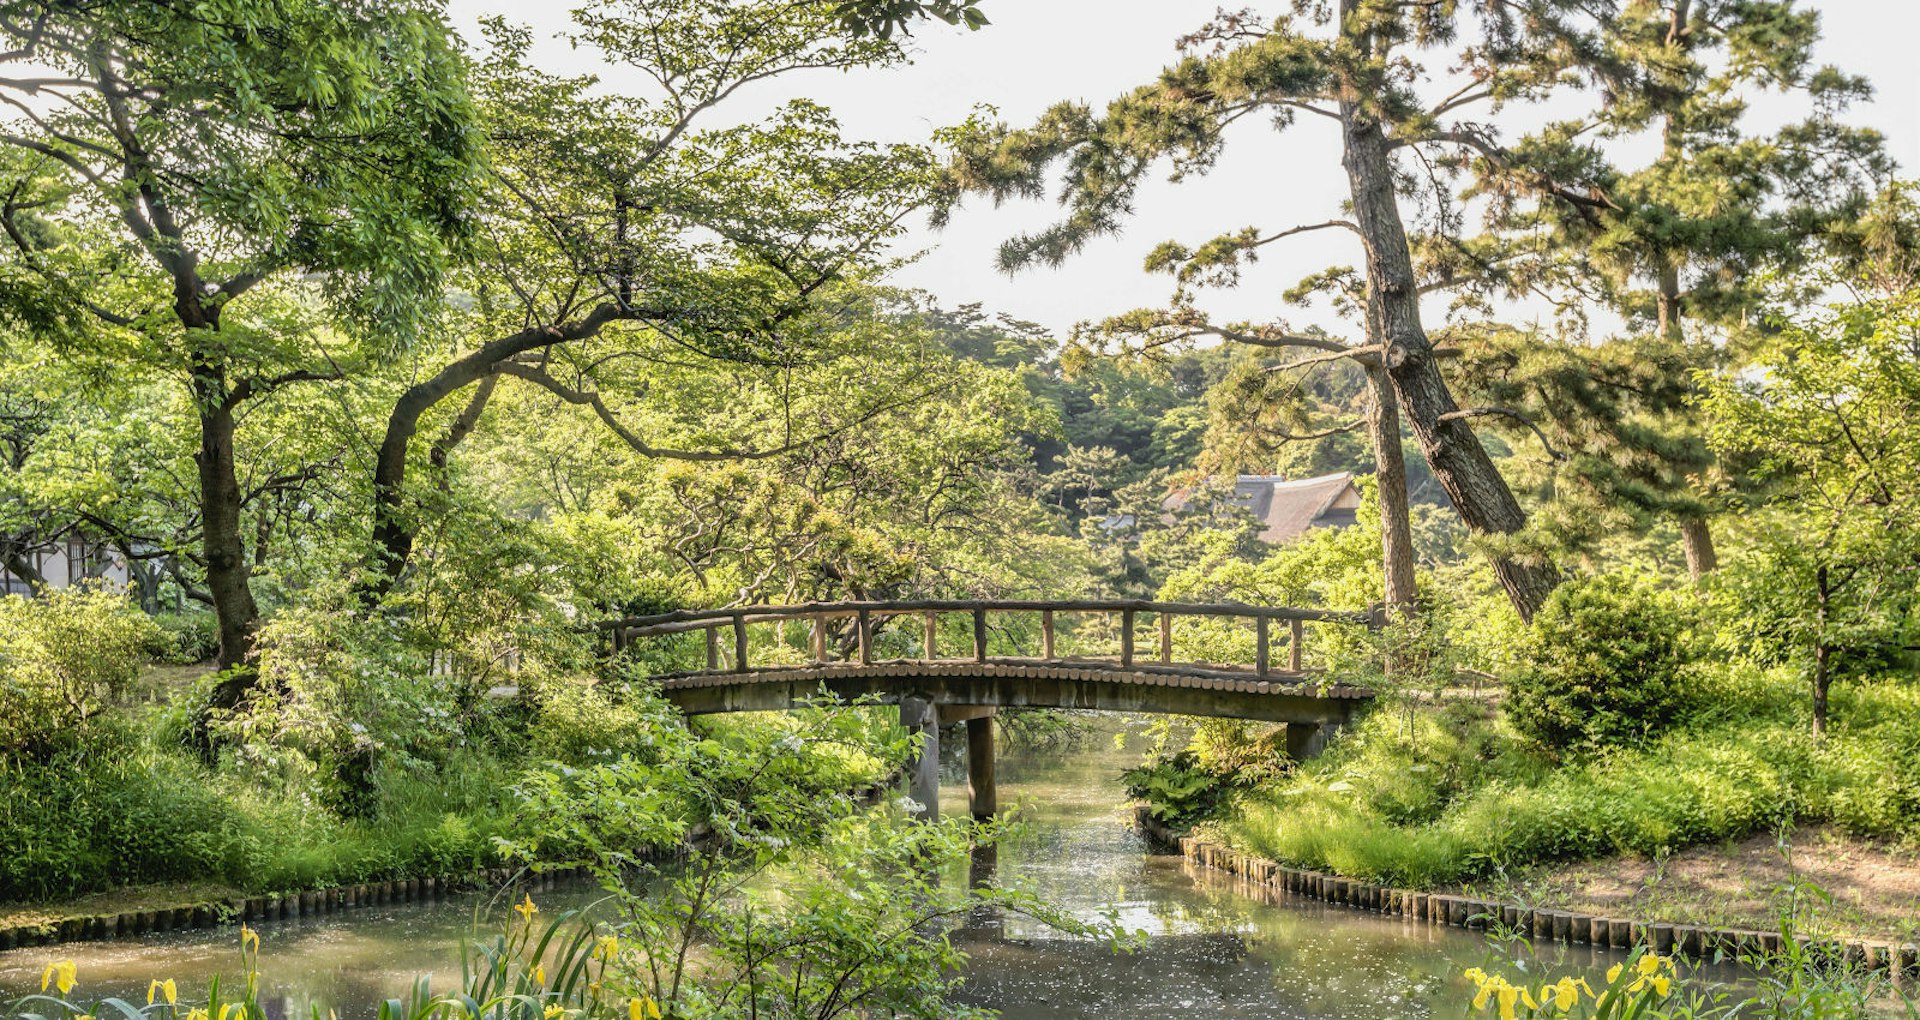 YOKOHAMA, KANAGAWA, JAPAN - 2017/05/19: Kankabashi Bridge at Sankeien Garden. Sankeien is a traditional and typical Japanese-style garden designed and landscaped by Sankei Hara, a wealthy businessman in the silk trade. (Photo by Olaf Protze/LightRocket via Getty Images)